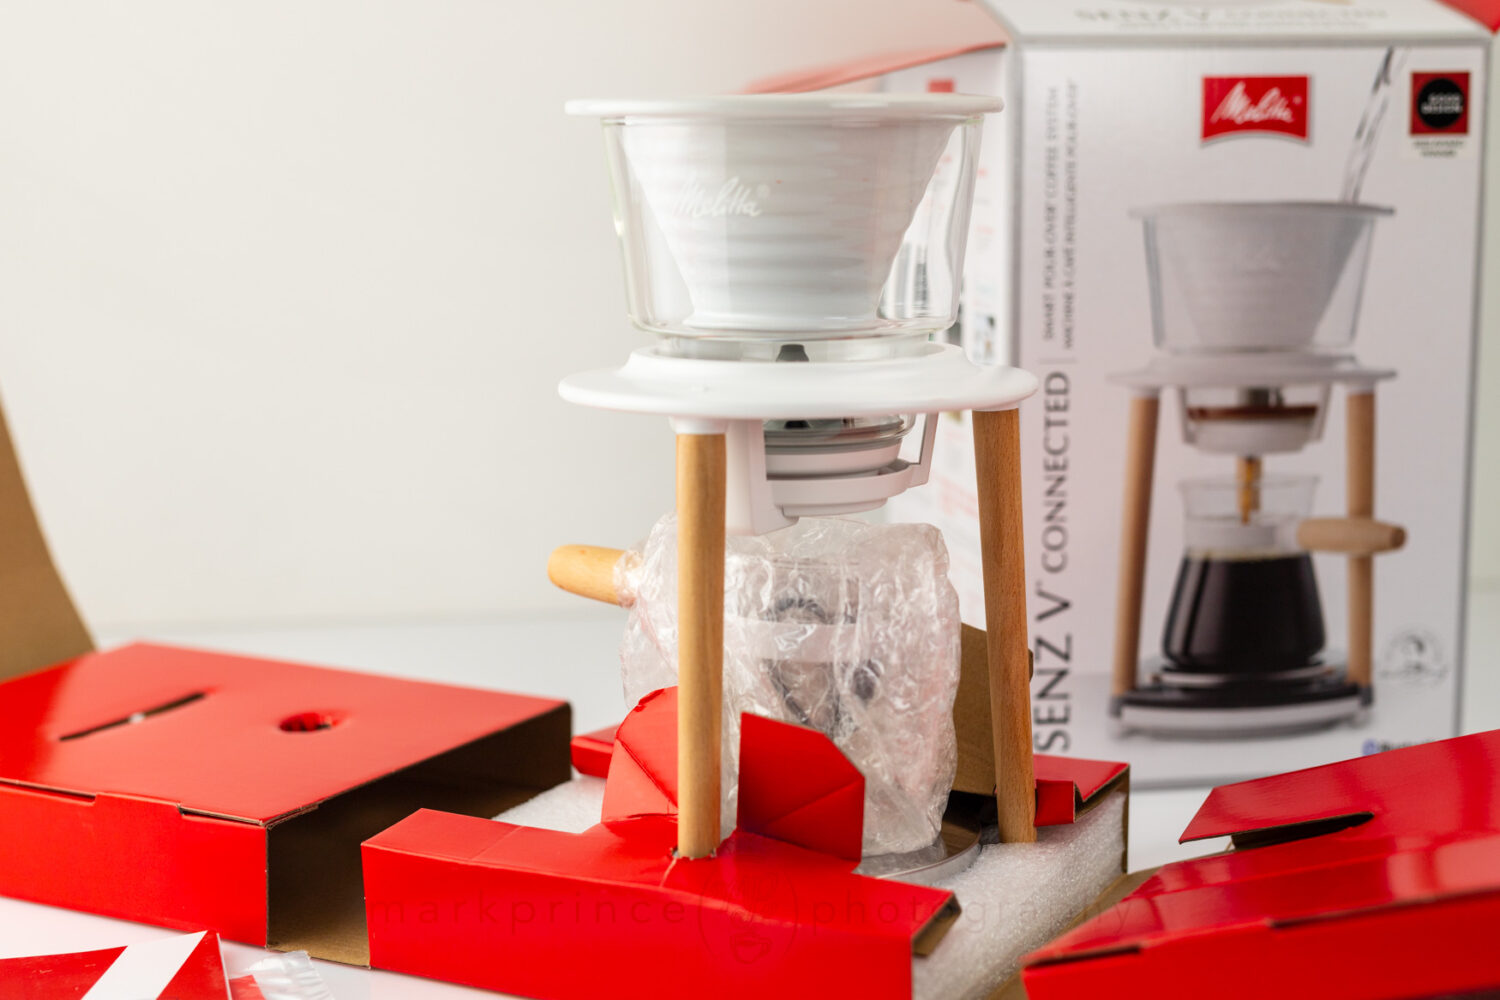 Unboxing the Melitta Senz V (the Connected Version)